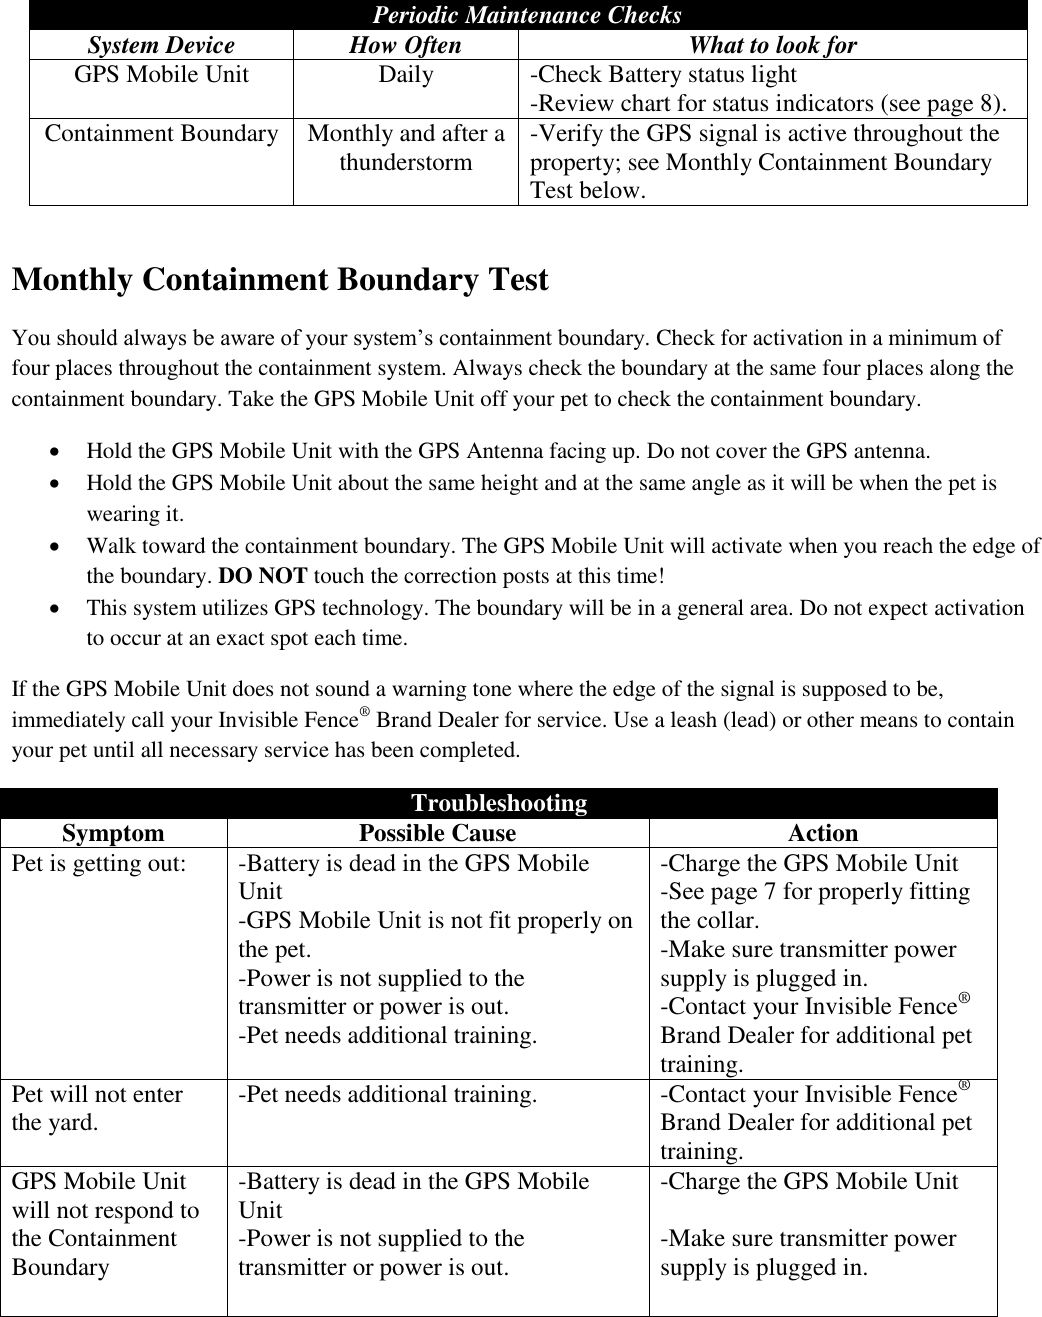 Periodic Maintenance Checks System Device How Often What to look for GPS Mobile Unit Daily -Check Battery status light -Review chart for status indicators (see page 8). Containment Boundary Monthly and after a thunderstorm -Verify the GPS signal is active throughout the property; see Monthly Containment Boundary Test below.   Monthly Containment Boundary Test You should always be aware of your system’s containment boundary. Check for activation in a minimum of four places throughout the containment system. Always check the boundary at the same four places along the containment boundary. Take the GPS Mobile Unit off your pet to check the containment boundary.   Hold the GPS Mobile Unit with the GPS Antenna facing up. Do not cover the GPS antenna.  Hold the GPS Mobile Unit about the same height and at the same angle as it will be when the pet is wearing it.  Walk toward the containment boundary. The GPS Mobile Unit will activate when you reach the edge of the boundary. DO NOT touch the correction posts at this time!  This system utilizes GPS technology. The boundary will be in a general area. Do not expect activation to occur at an exact spot each time. If the GPS Mobile Unit does not sound a warning tone where the edge of the signal is supposed to be, immediately call your Invisible Fence® Brand Dealer for service. Use a leash (lead) or other means to contain your pet until all necessary service has been completed.  Troubleshooting Symptom Possible Cause Action Pet is getting out: -Battery is dead in the GPS Mobile Unit -GPS Mobile Unit is not fit properly on the pet. -Power is not supplied to the transmitter or power is out. -Pet needs additional training.    -Charge the GPS Mobile Unit -See page 7 for properly fitting the collar. -Make sure transmitter power supply is plugged in. -Contact your Invisible Fence® Brand Dealer for additional pet training. Pet will not enter the yard. -Pet needs additional training. -Contact your Invisible Fence® Brand Dealer for additional pet training. GPS Mobile Unit will not respond to the Containment Boundary -Battery is dead in the GPS Mobile Unit -Power is not supplied to the transmitter or power is out.  -Charge the GPS Mobile Unit  -Make sure transmitter power supply is plugged in.    